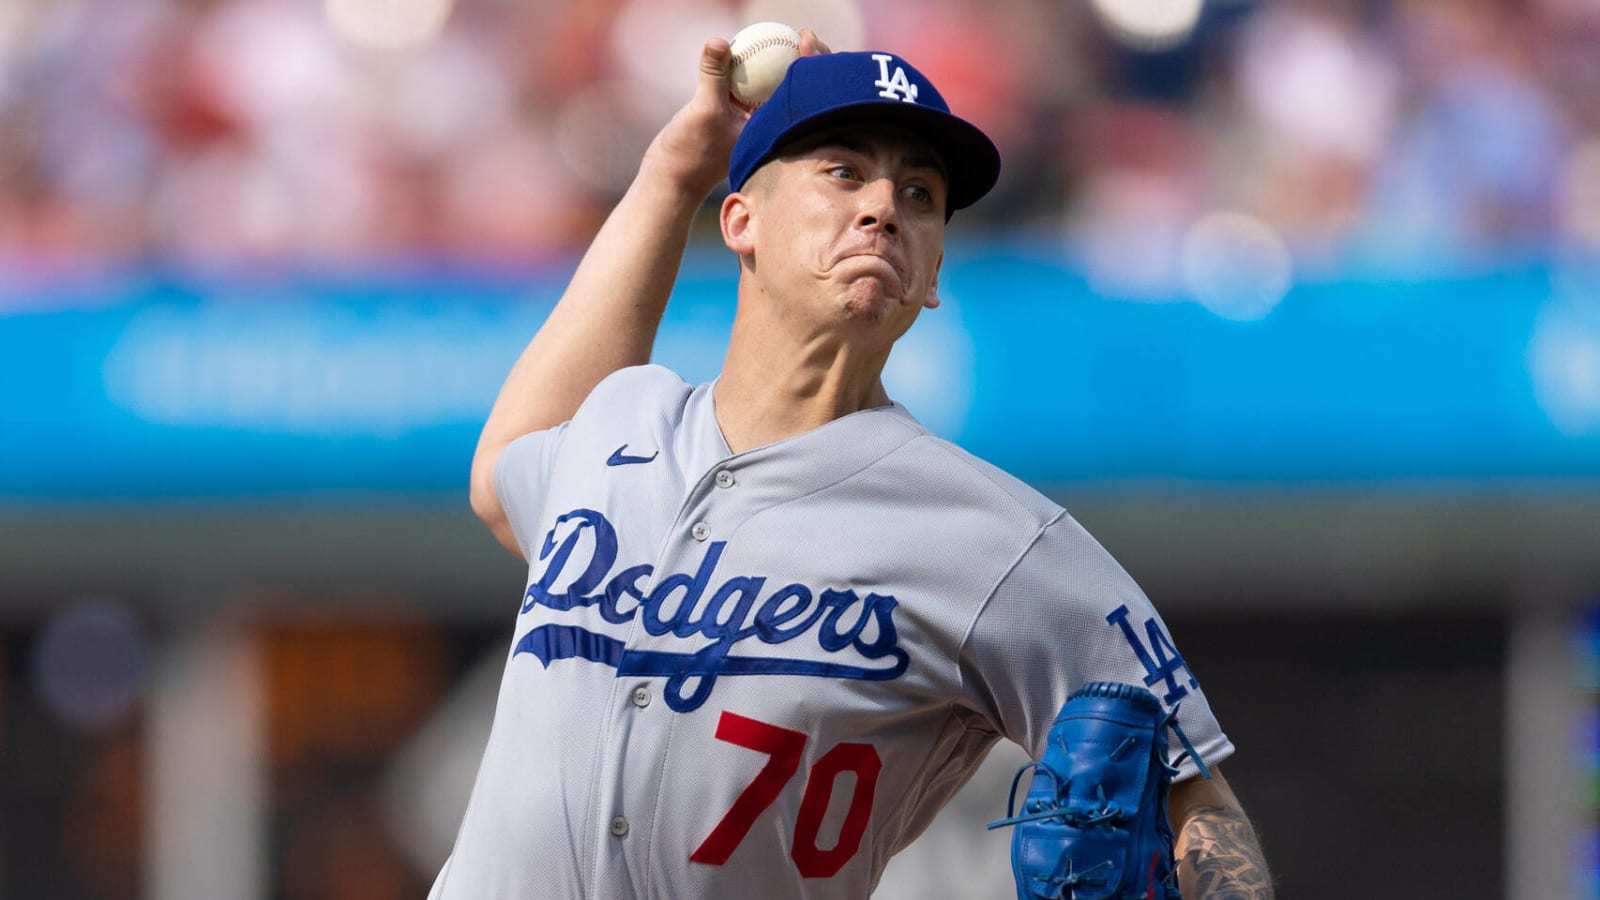 Dodgers rookie off to historic start, continuing franchise tradition